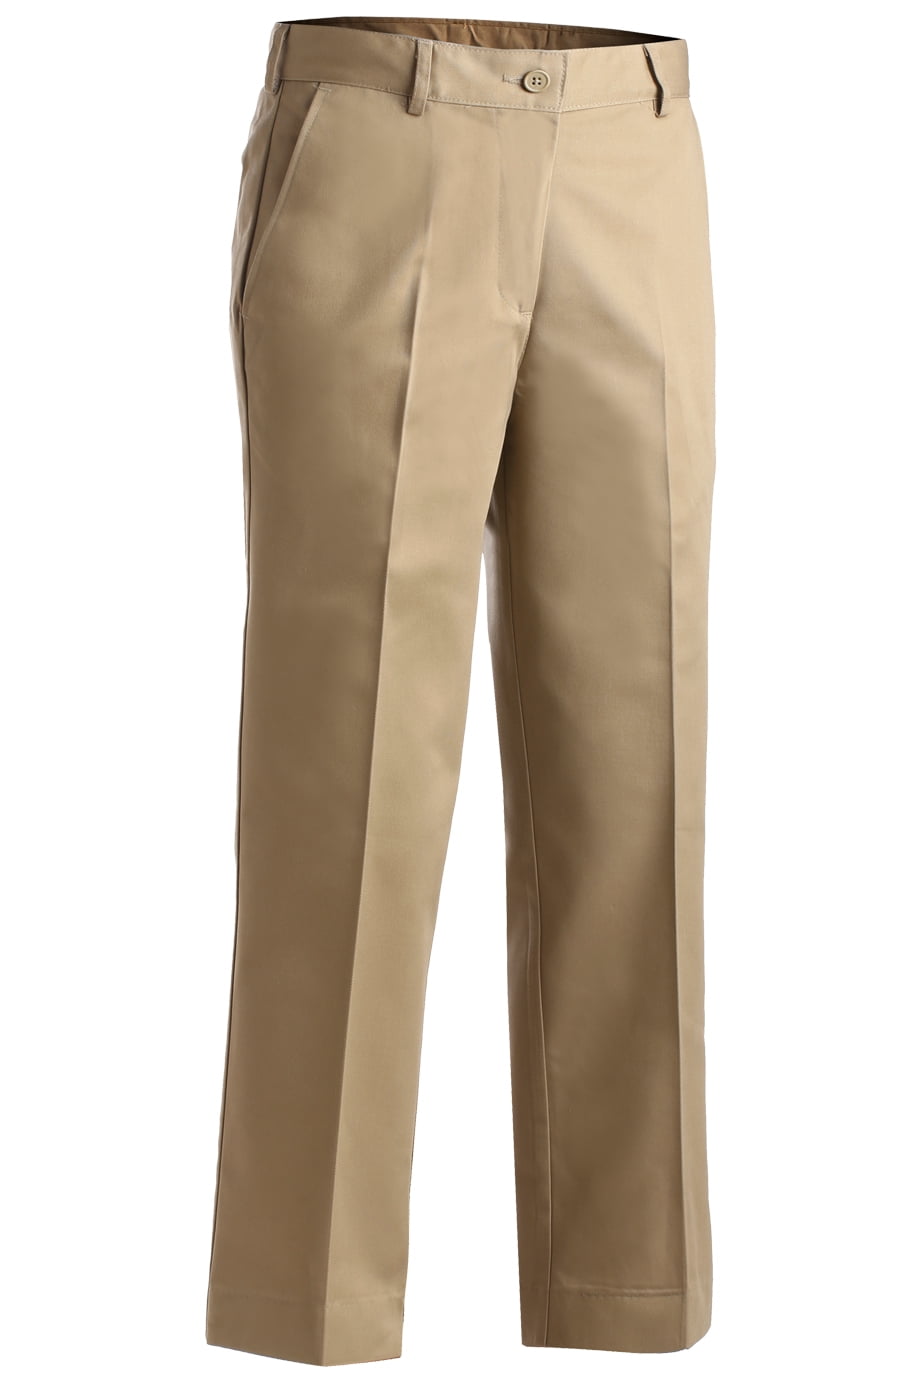 Edwards MENS EASY FIT CHINO FLAT FRONT PANT